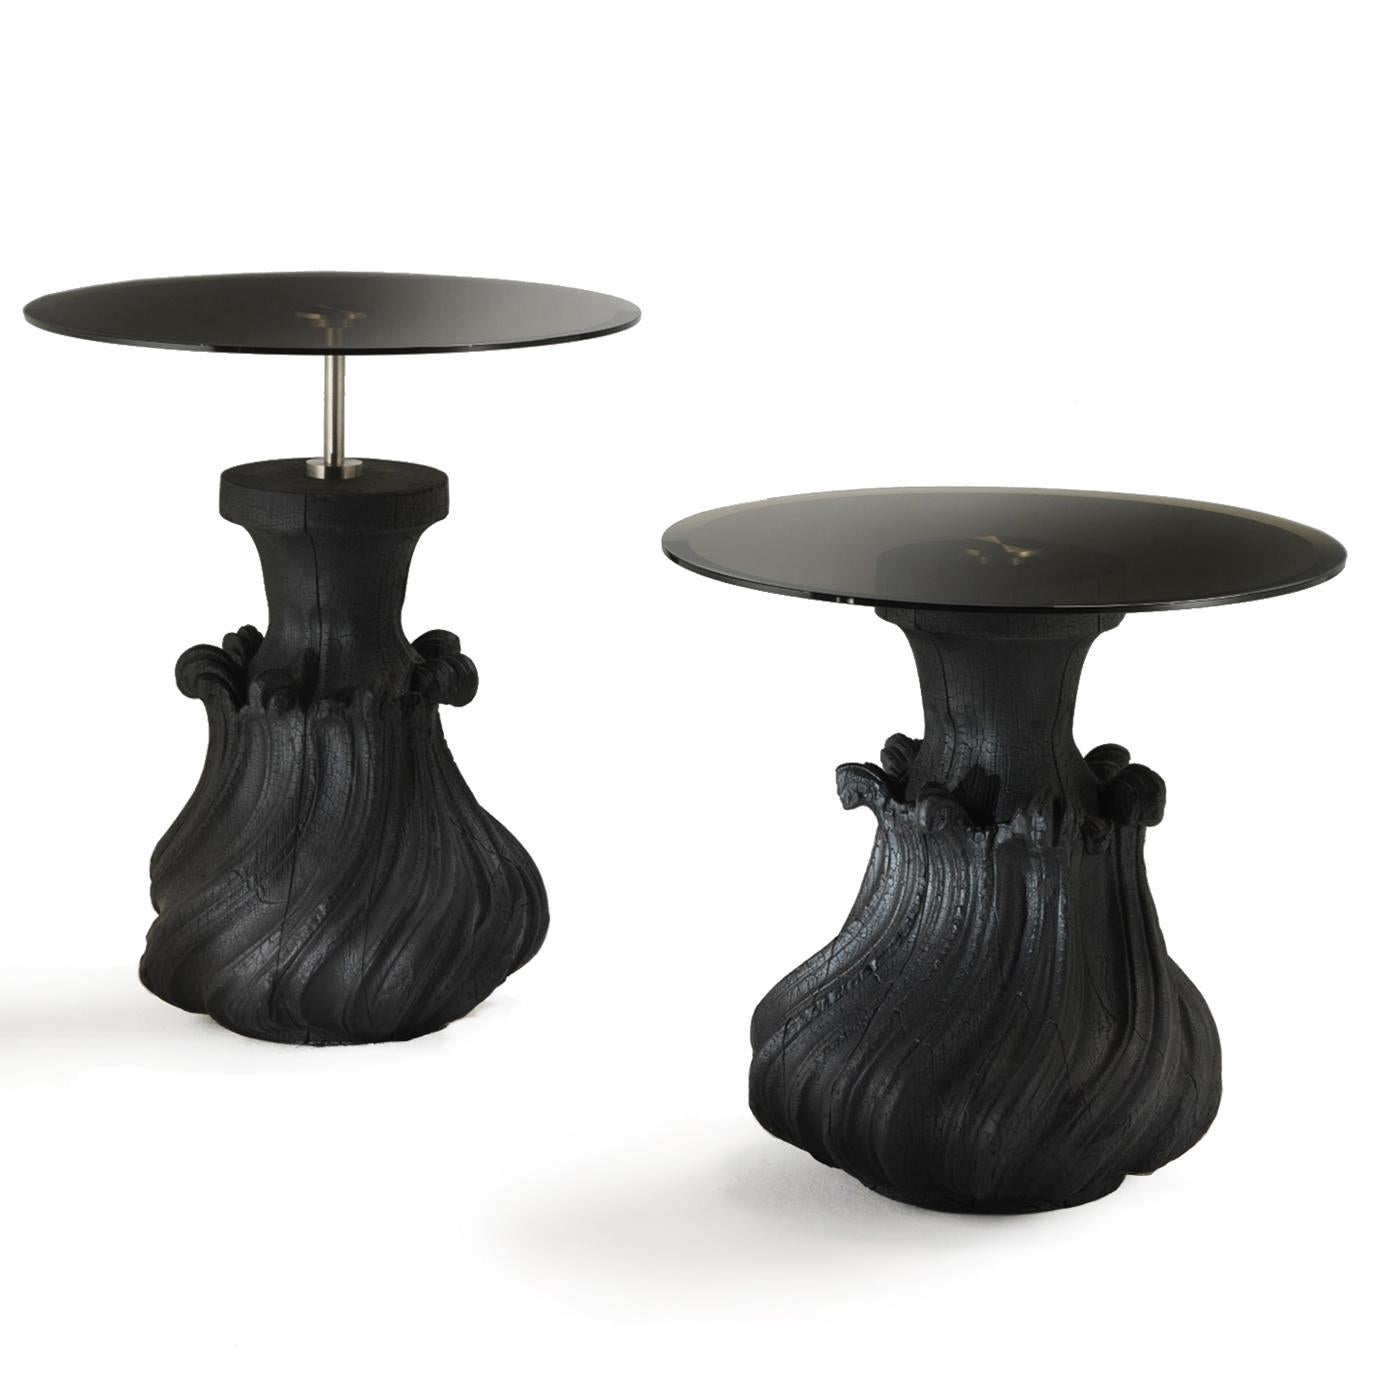 The bold and modern design of this versatile side table is a striking addition to a contemporary or eclectic interior, where it will be a functional surface to display everyday objects or lamps, while also adding a stunning accent. Its wooden